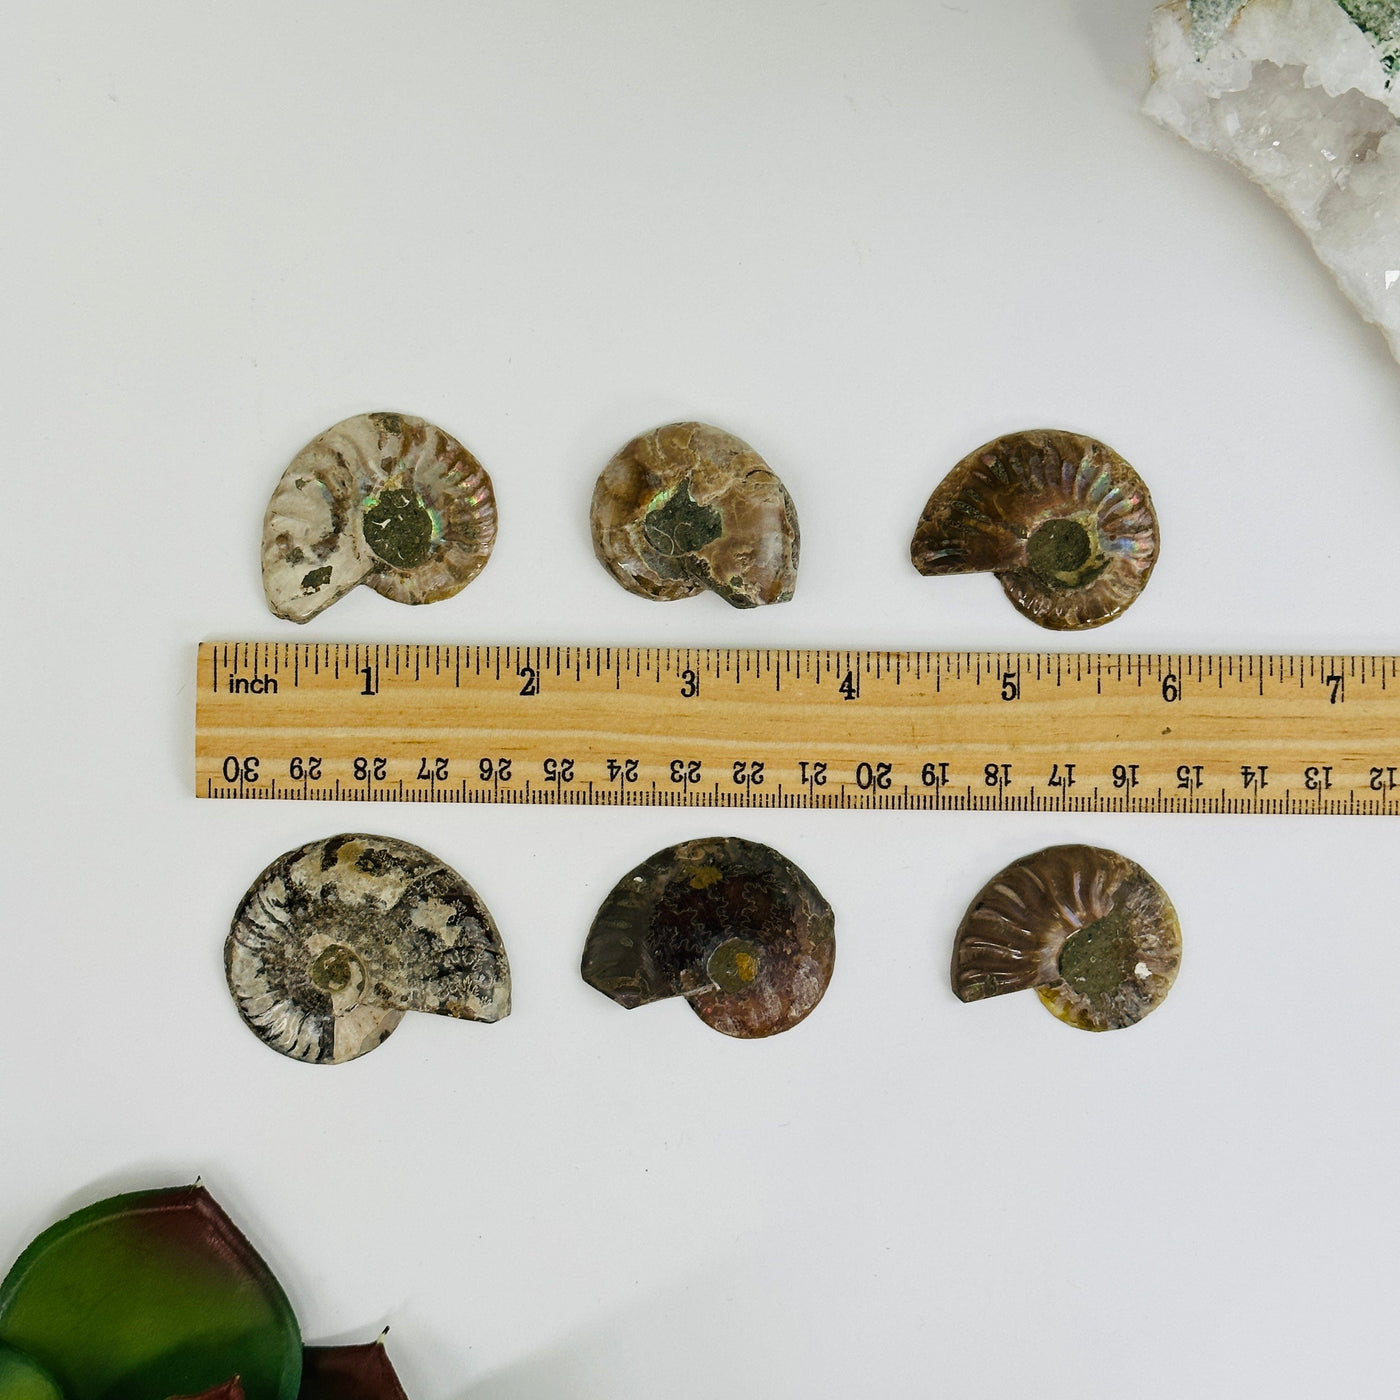 Ammonite slices next to a ruler for size reference on white background